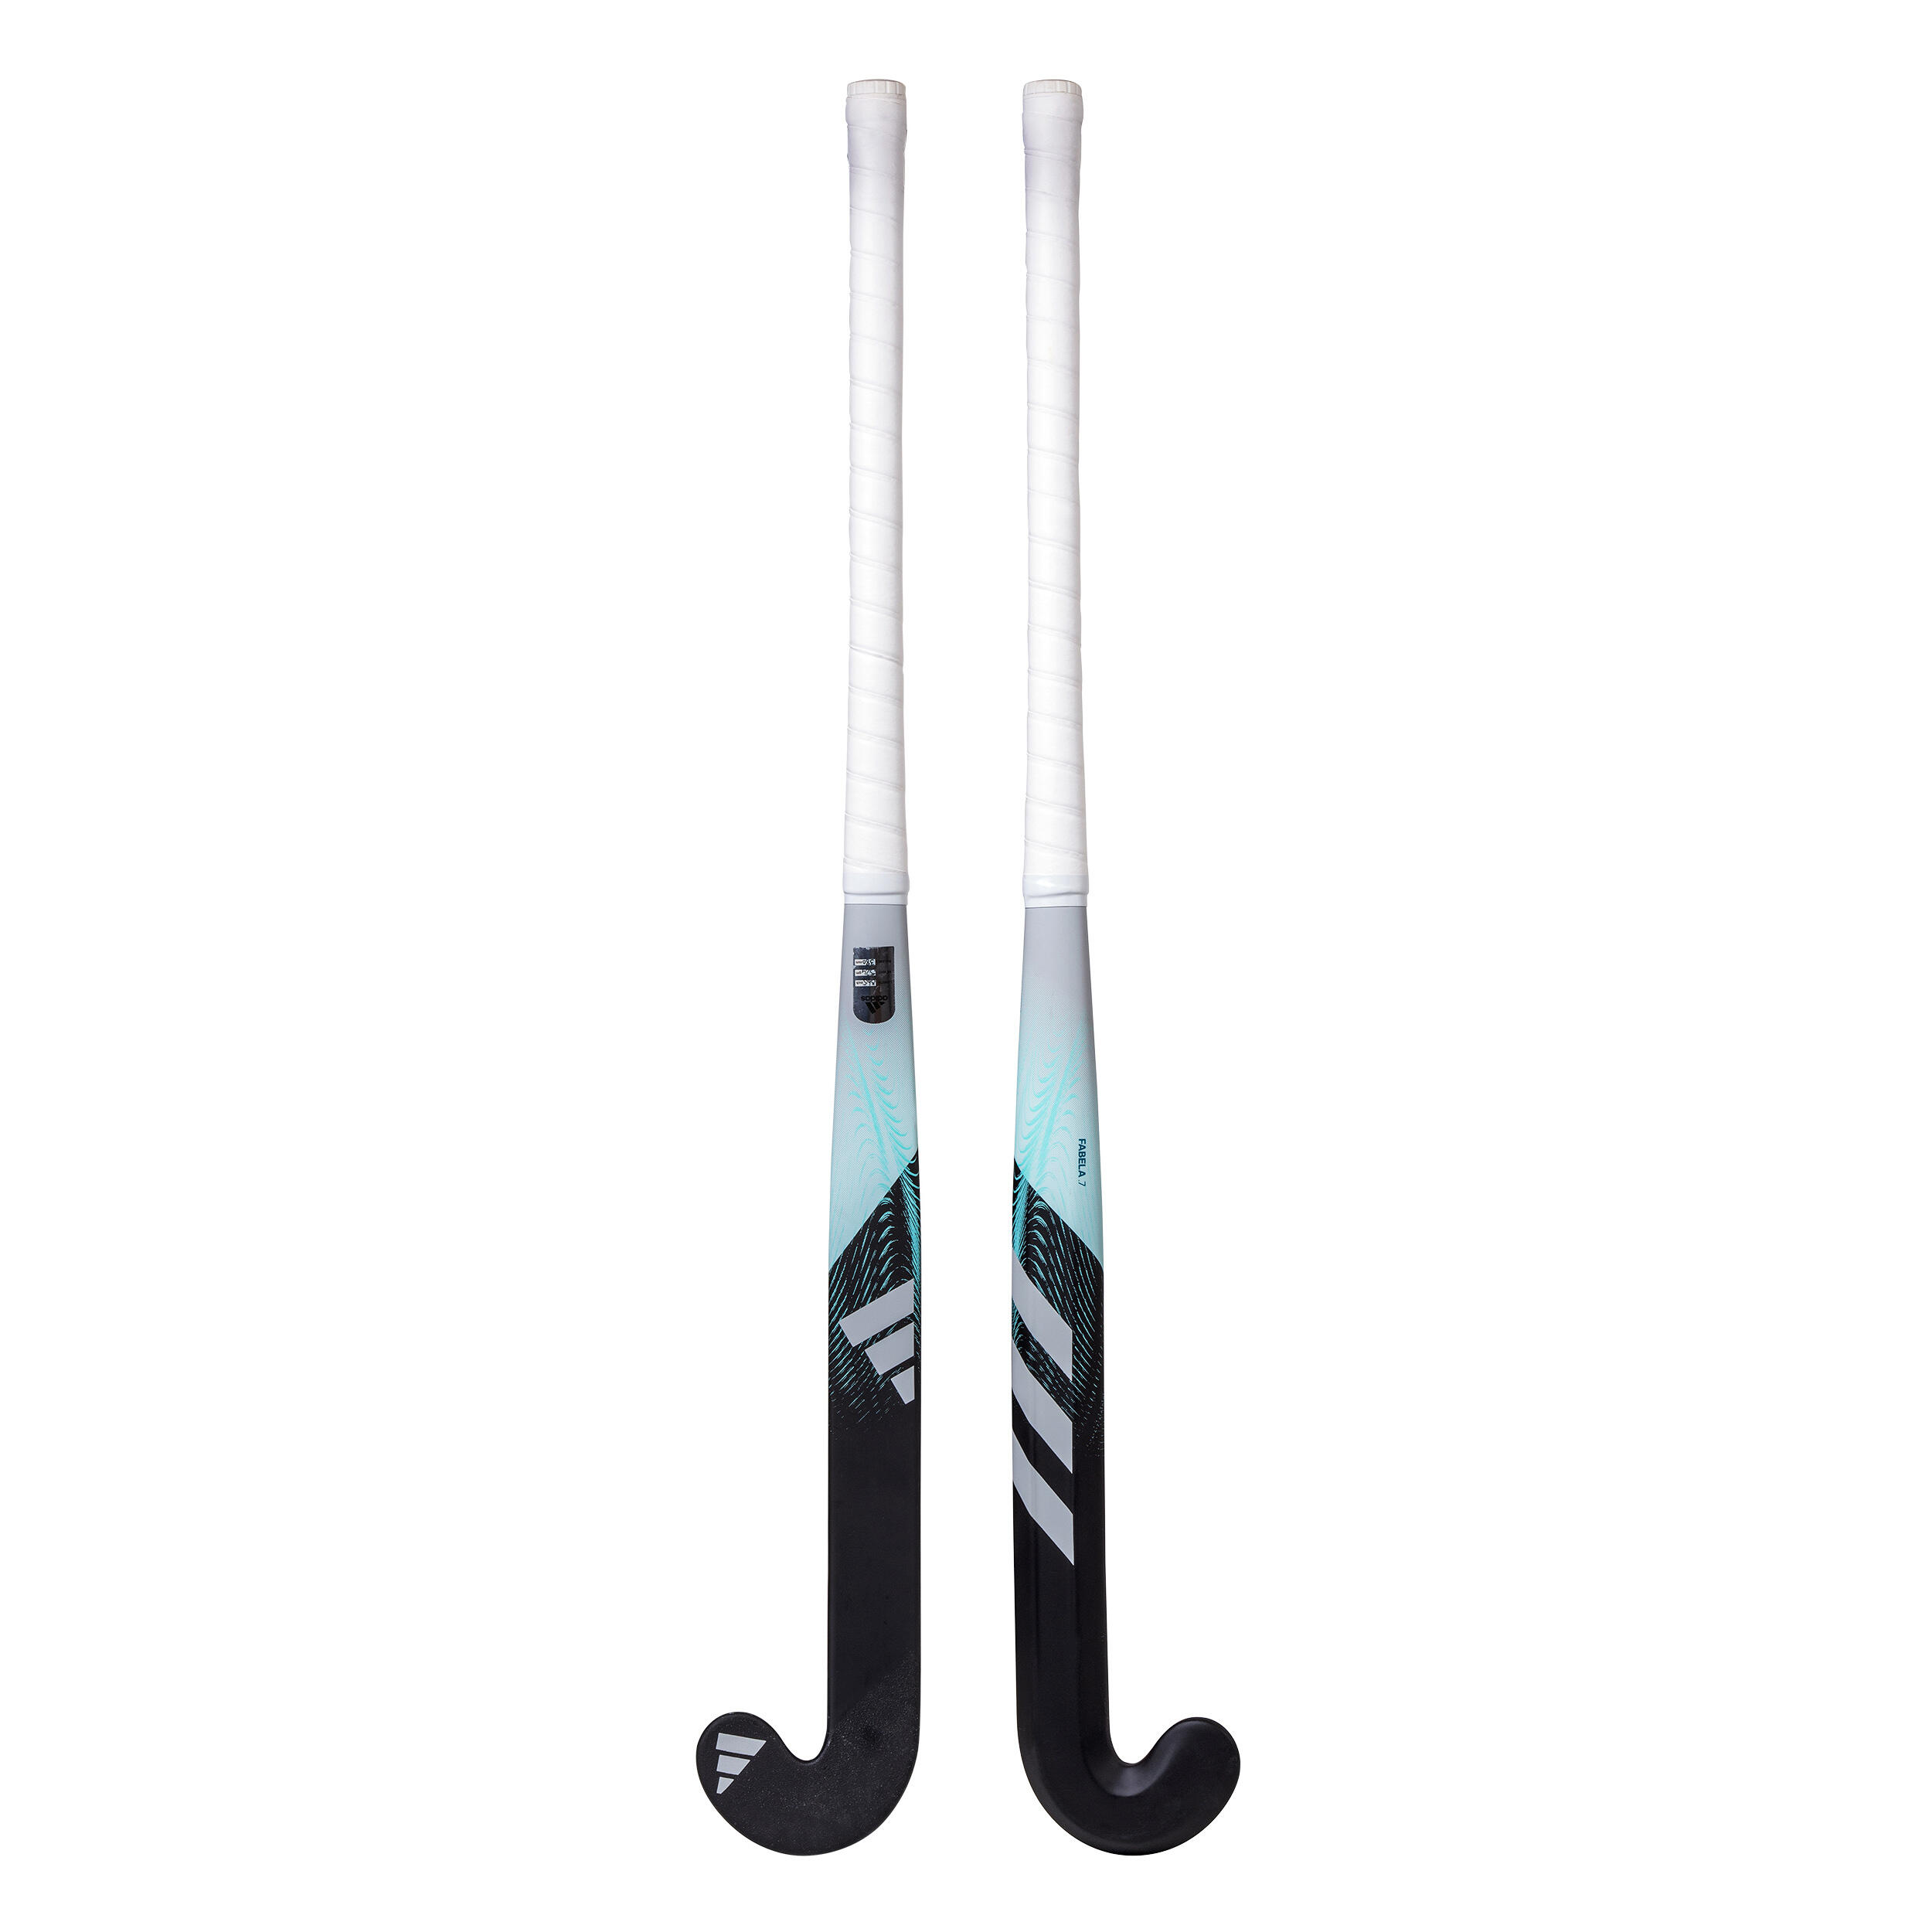 Adult Intermediate 20% Carbon Mid Bow Field Hockey Stick Fabela .7 - Black/Turquoise 11/12